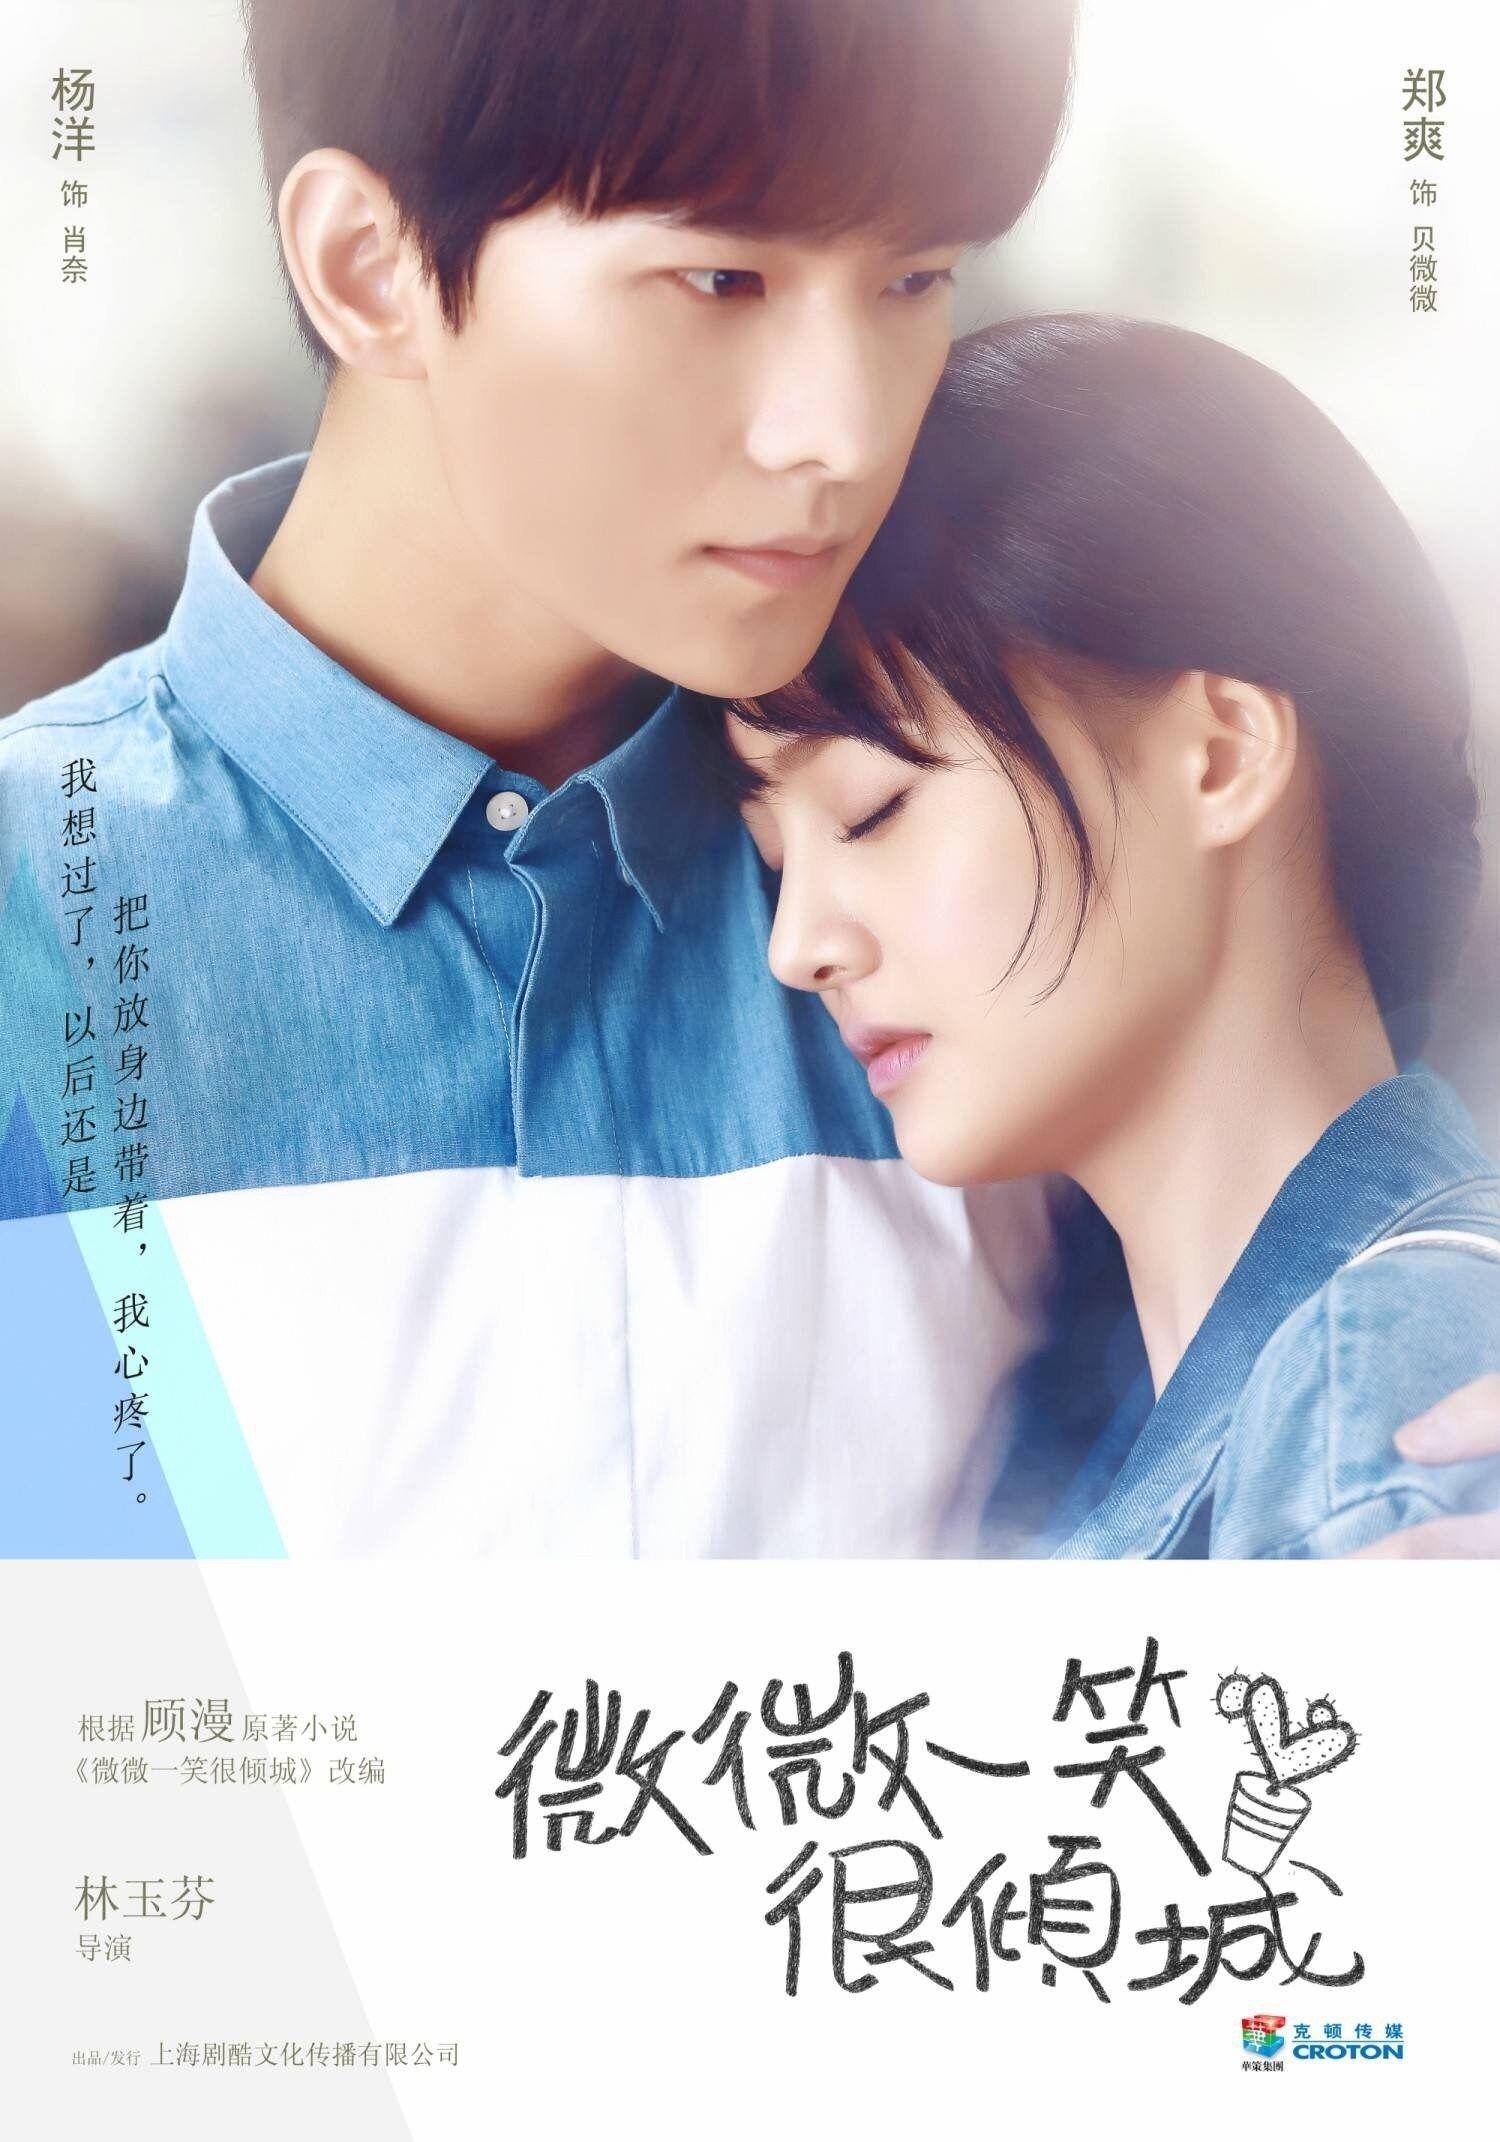 First Impressions: Love O2O (Just One Smile is Very Alluring)